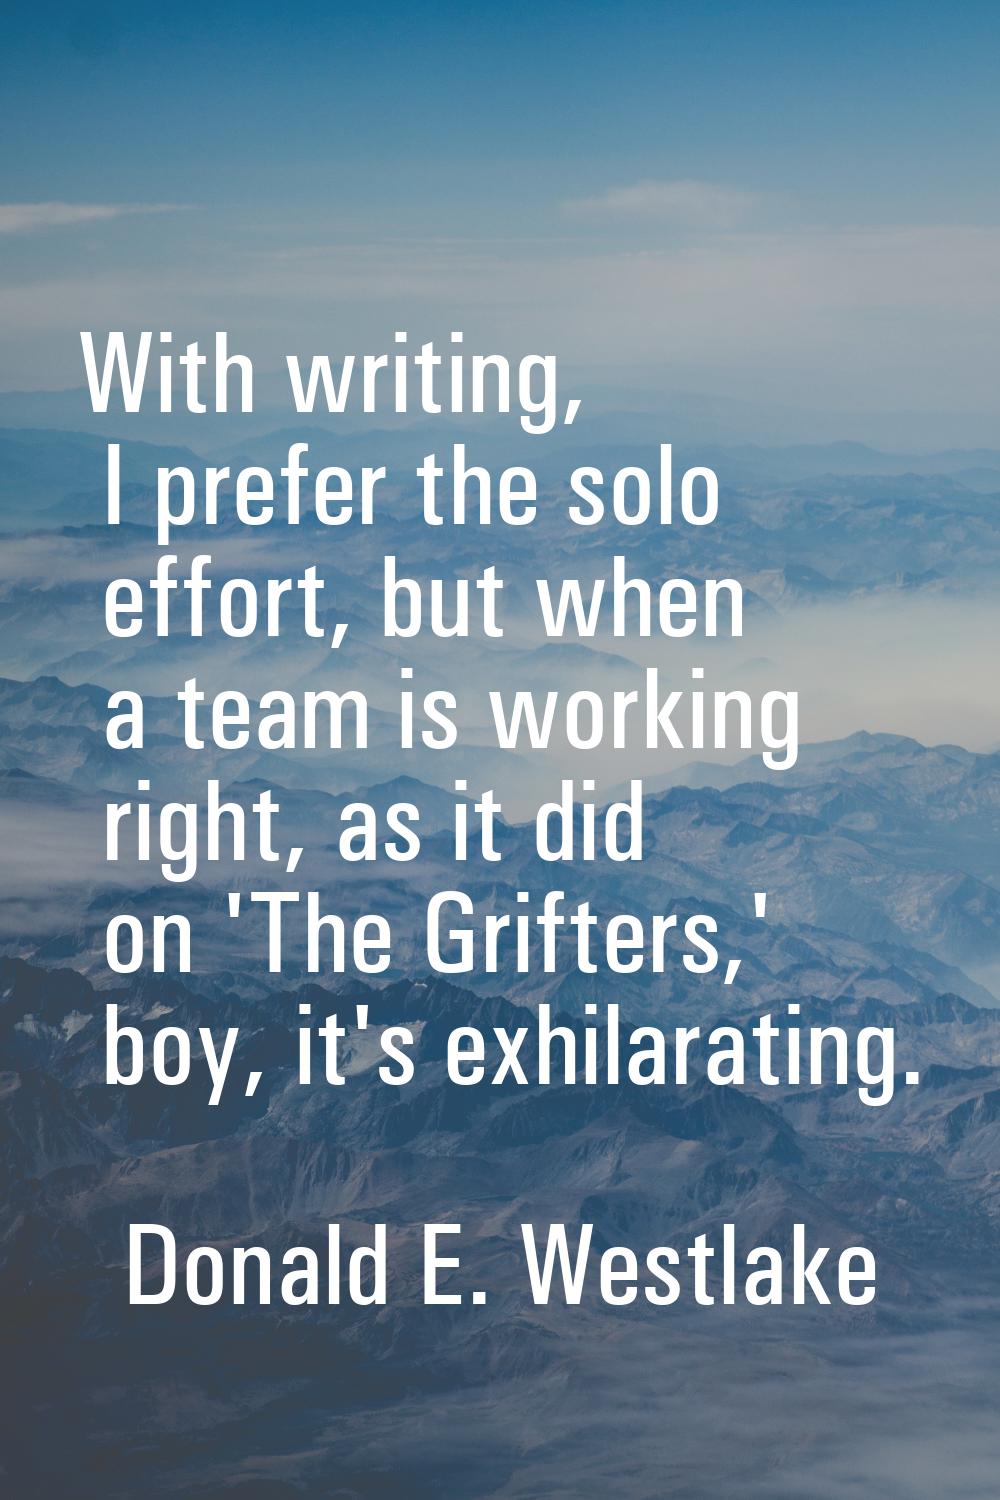 With writing, I prefer the solo effort, but when a team is working right, as it did on 'The Grifter